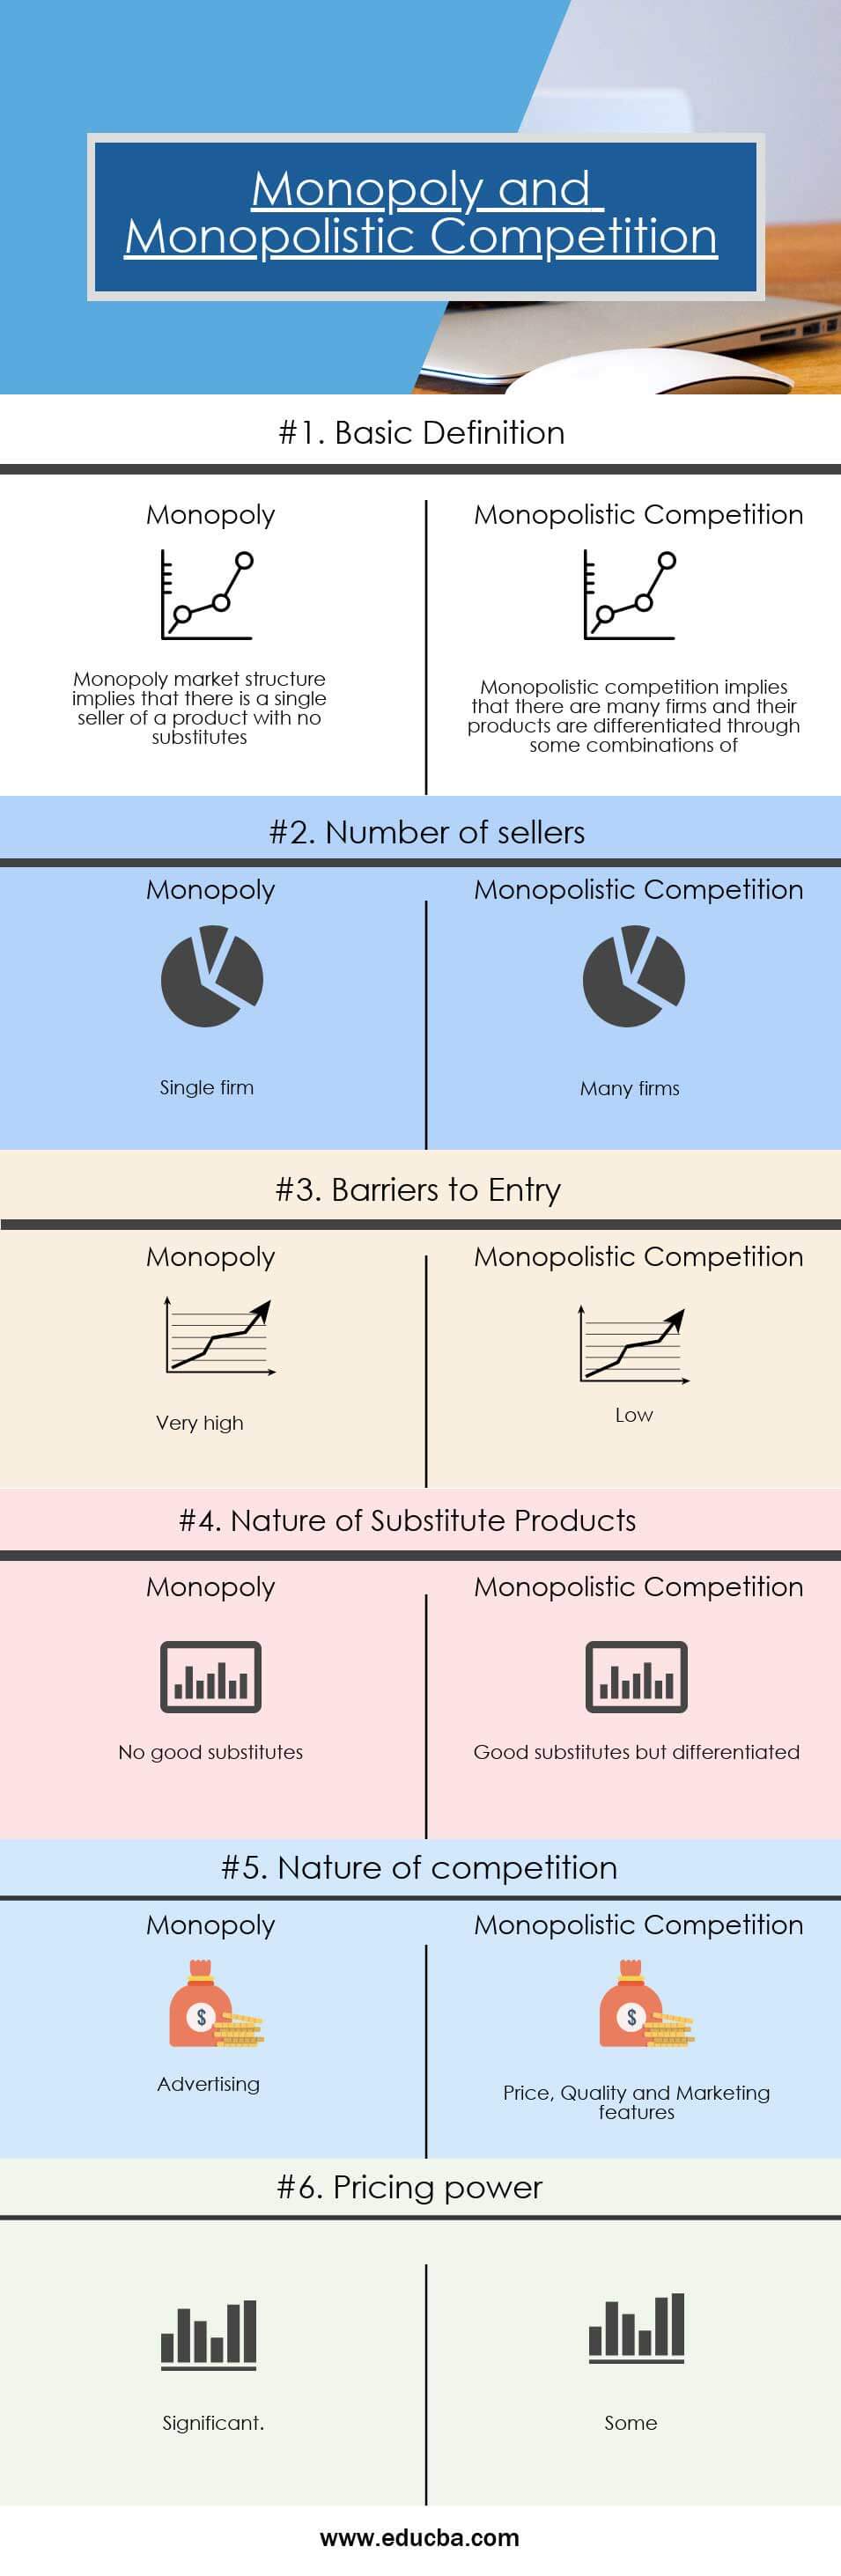 distinguish between monopoly and monopolistic competition